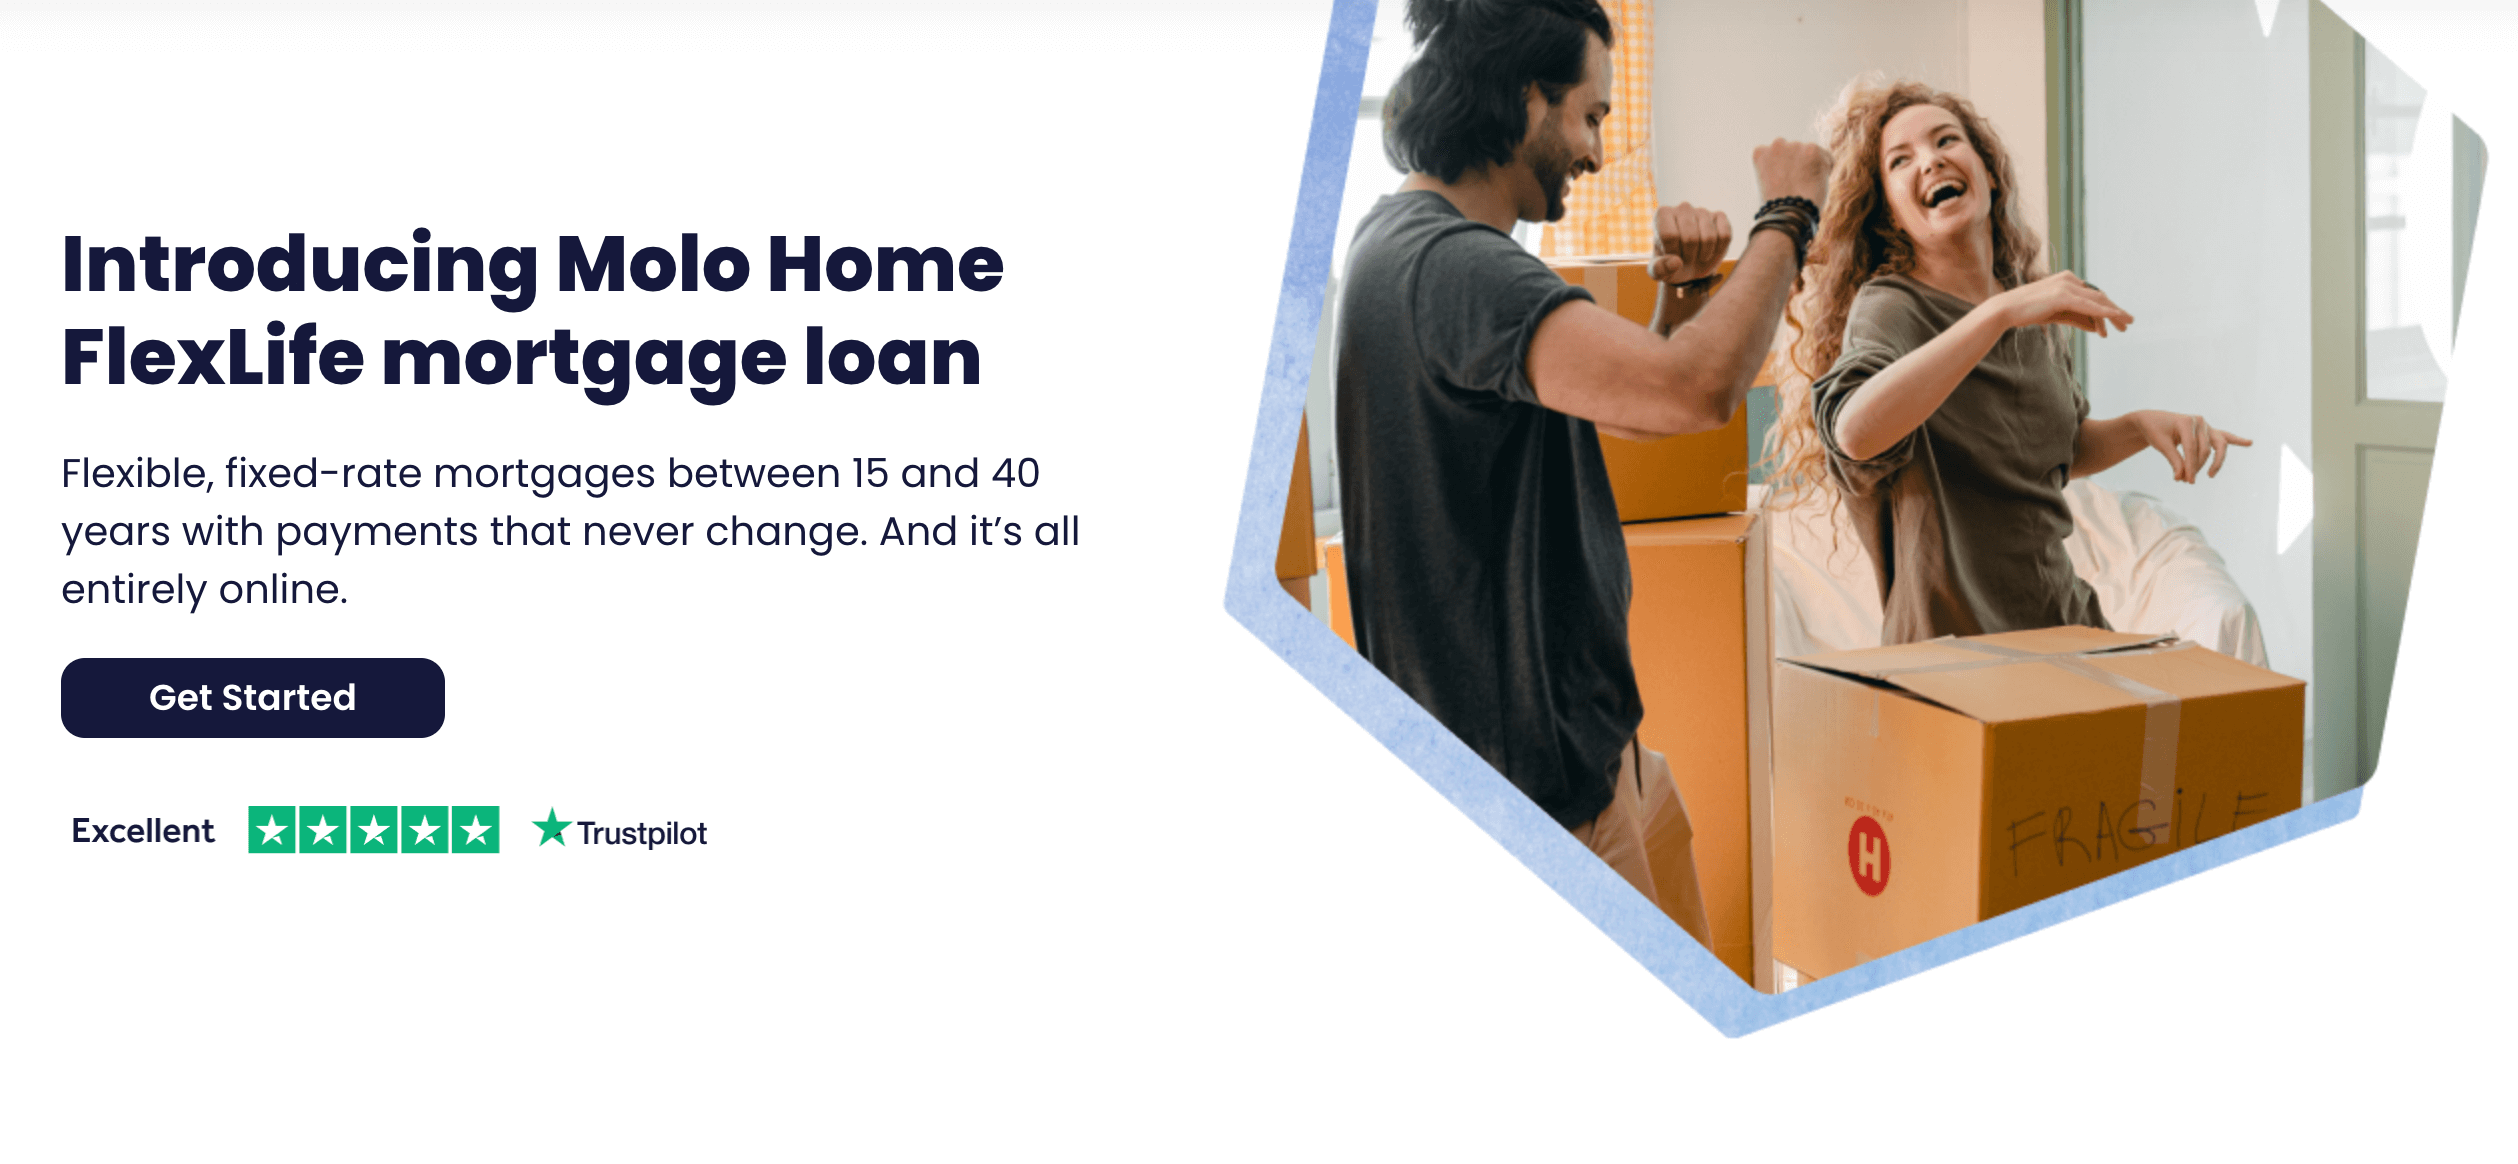 Molo launches its new residential FlexLife mortgage